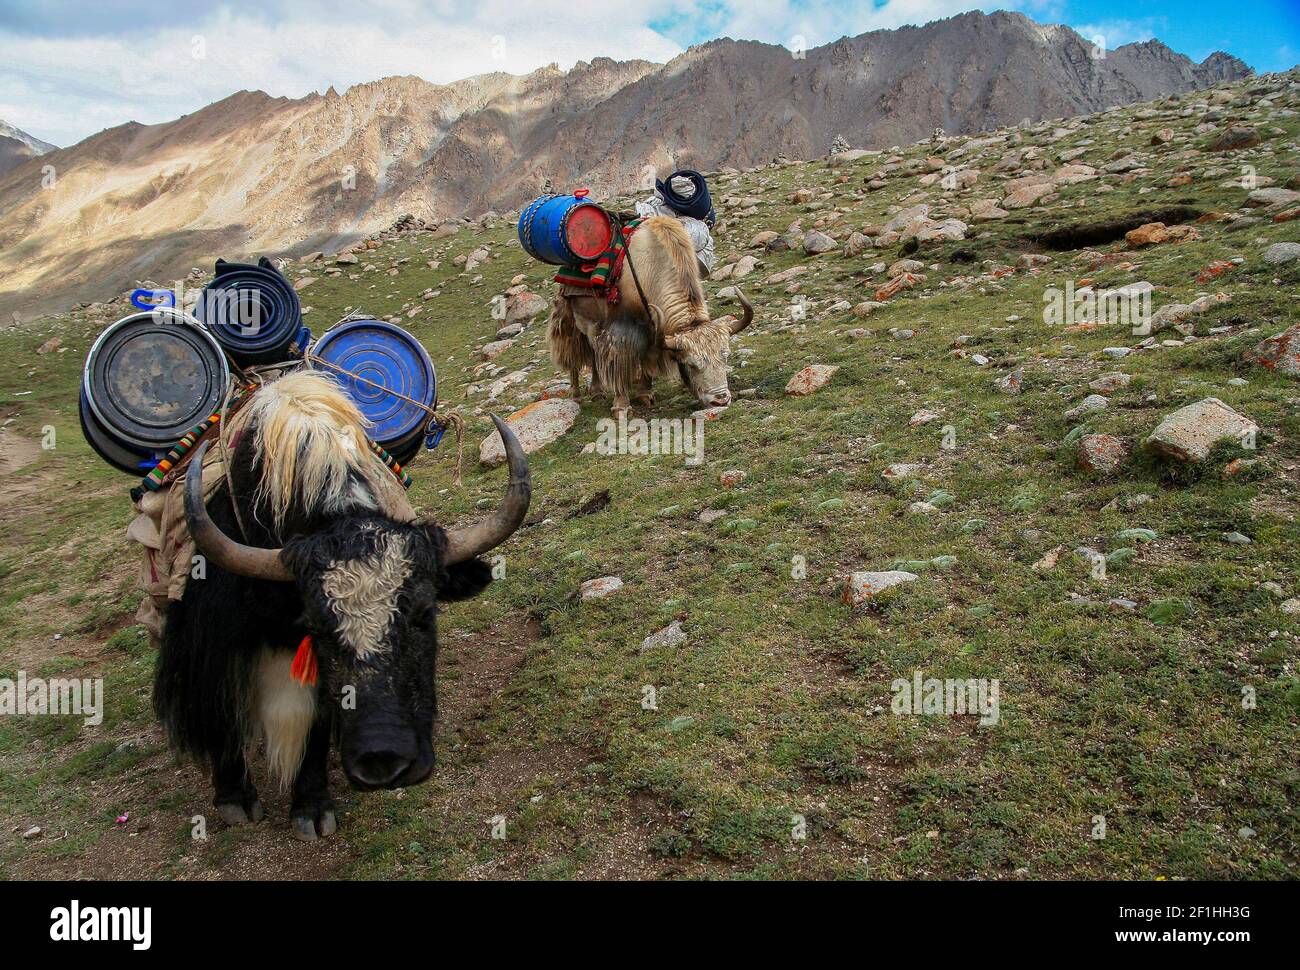 Yaks carrying goods and supplies Stock Photo